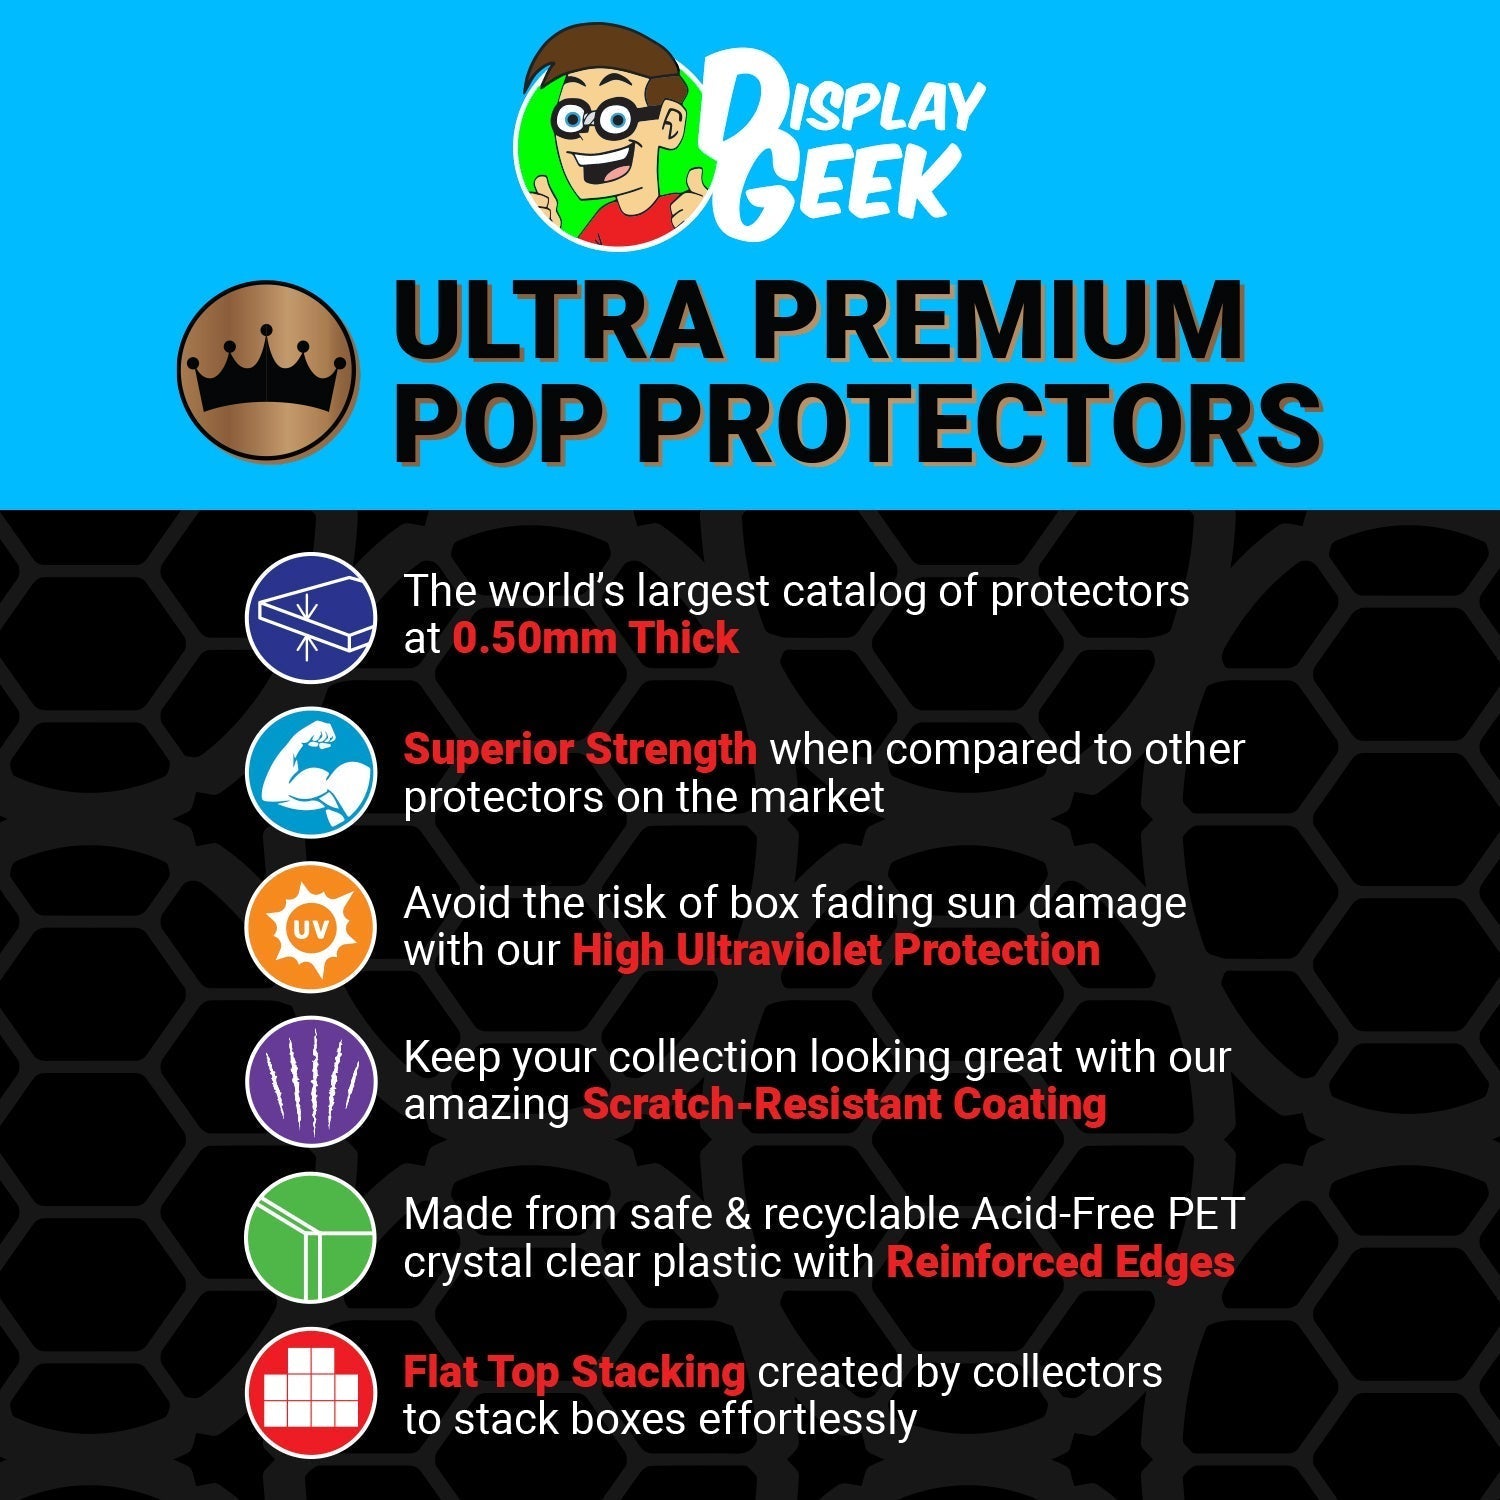 Pop Protector for Vecna with Creel House #37 Funko Pop Town - PPG Pop Protector Guide Search Created by Display Geek